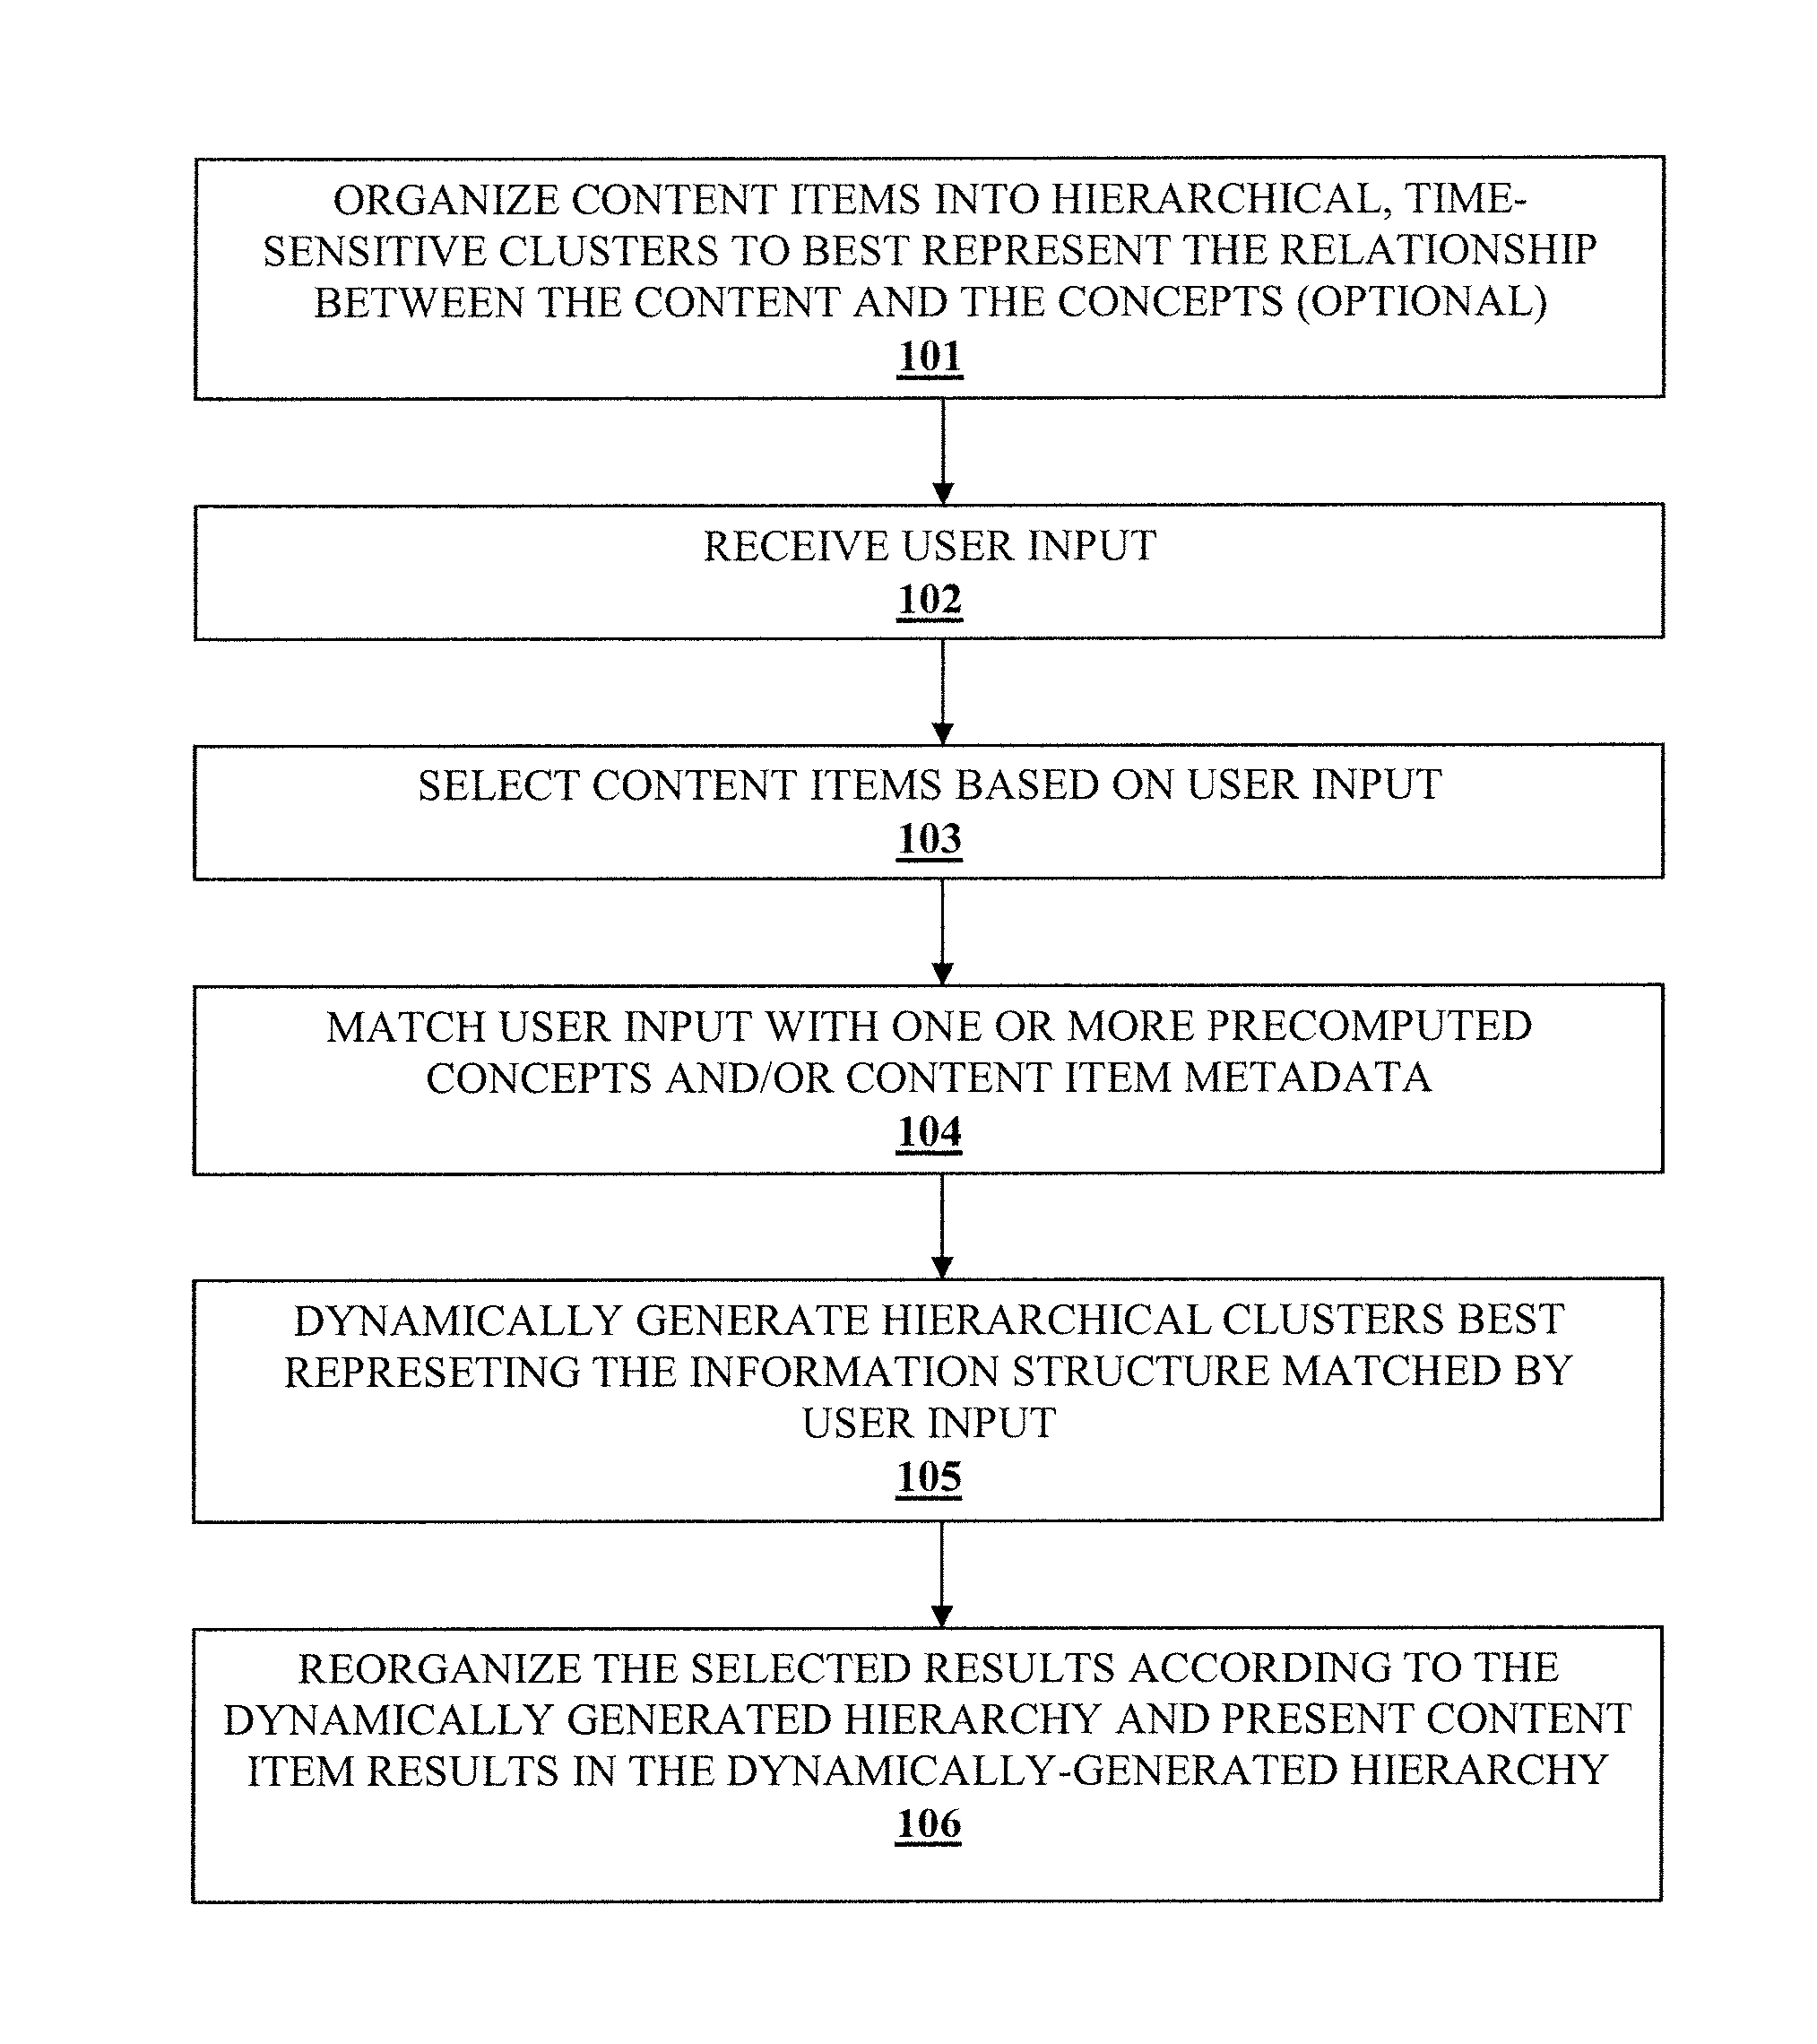 Methods and Systems for Dynamically Rearranging Search Results into Hierarchically Organized Concept Clusters